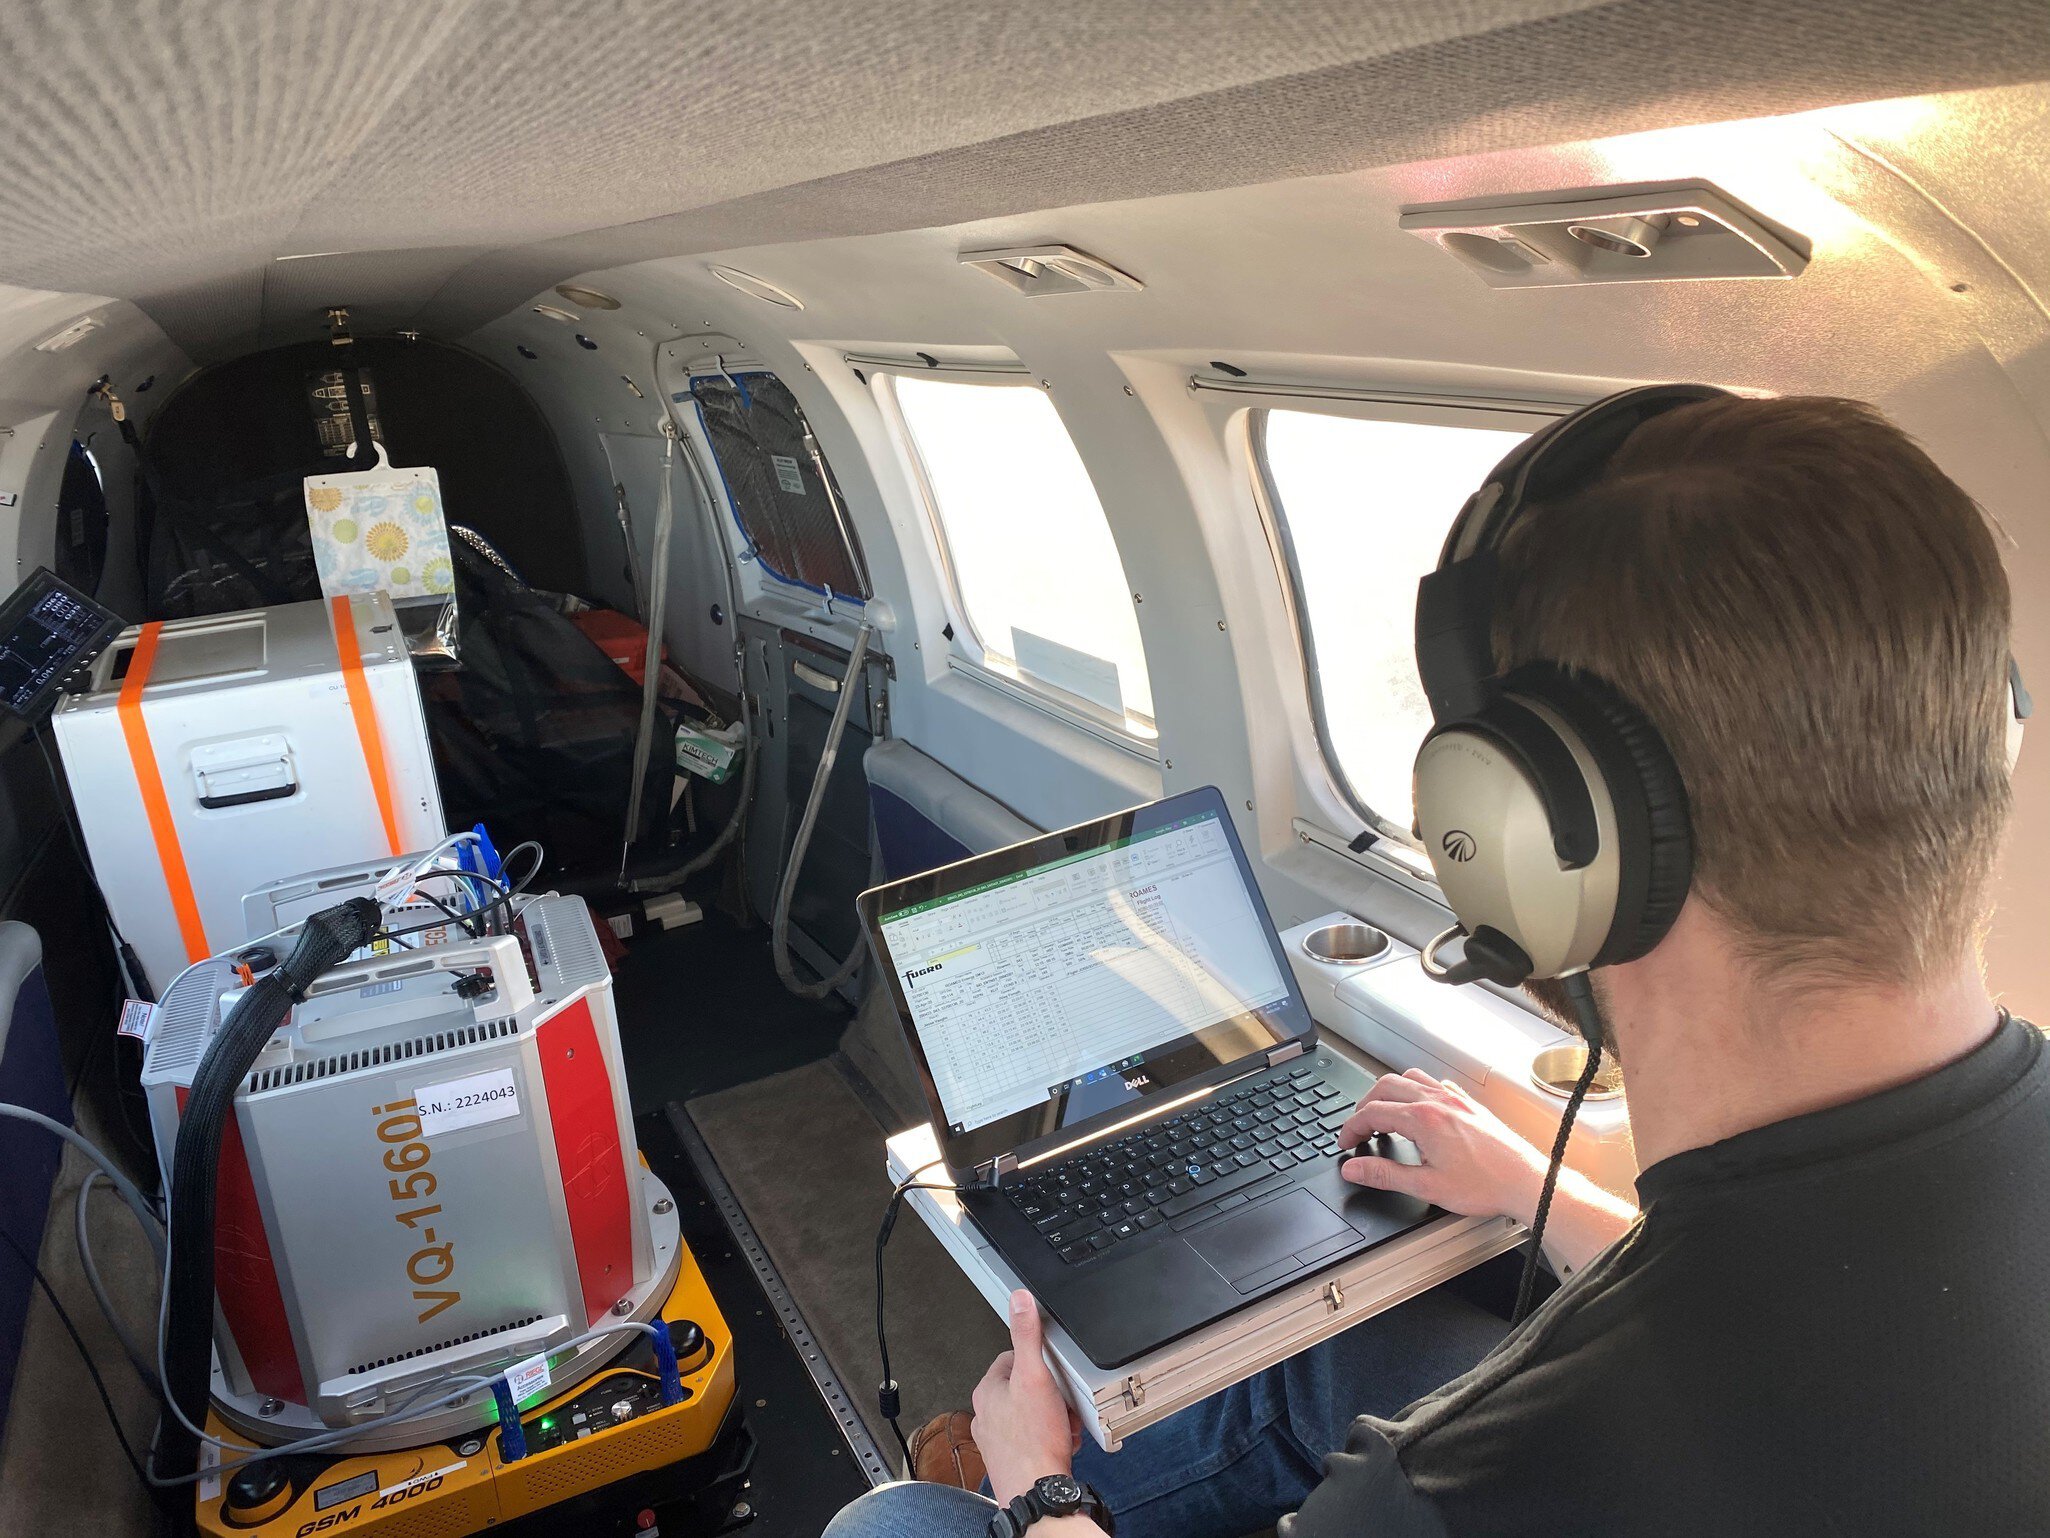 Imagery sensor operator in aeroplane during remote data acquisition